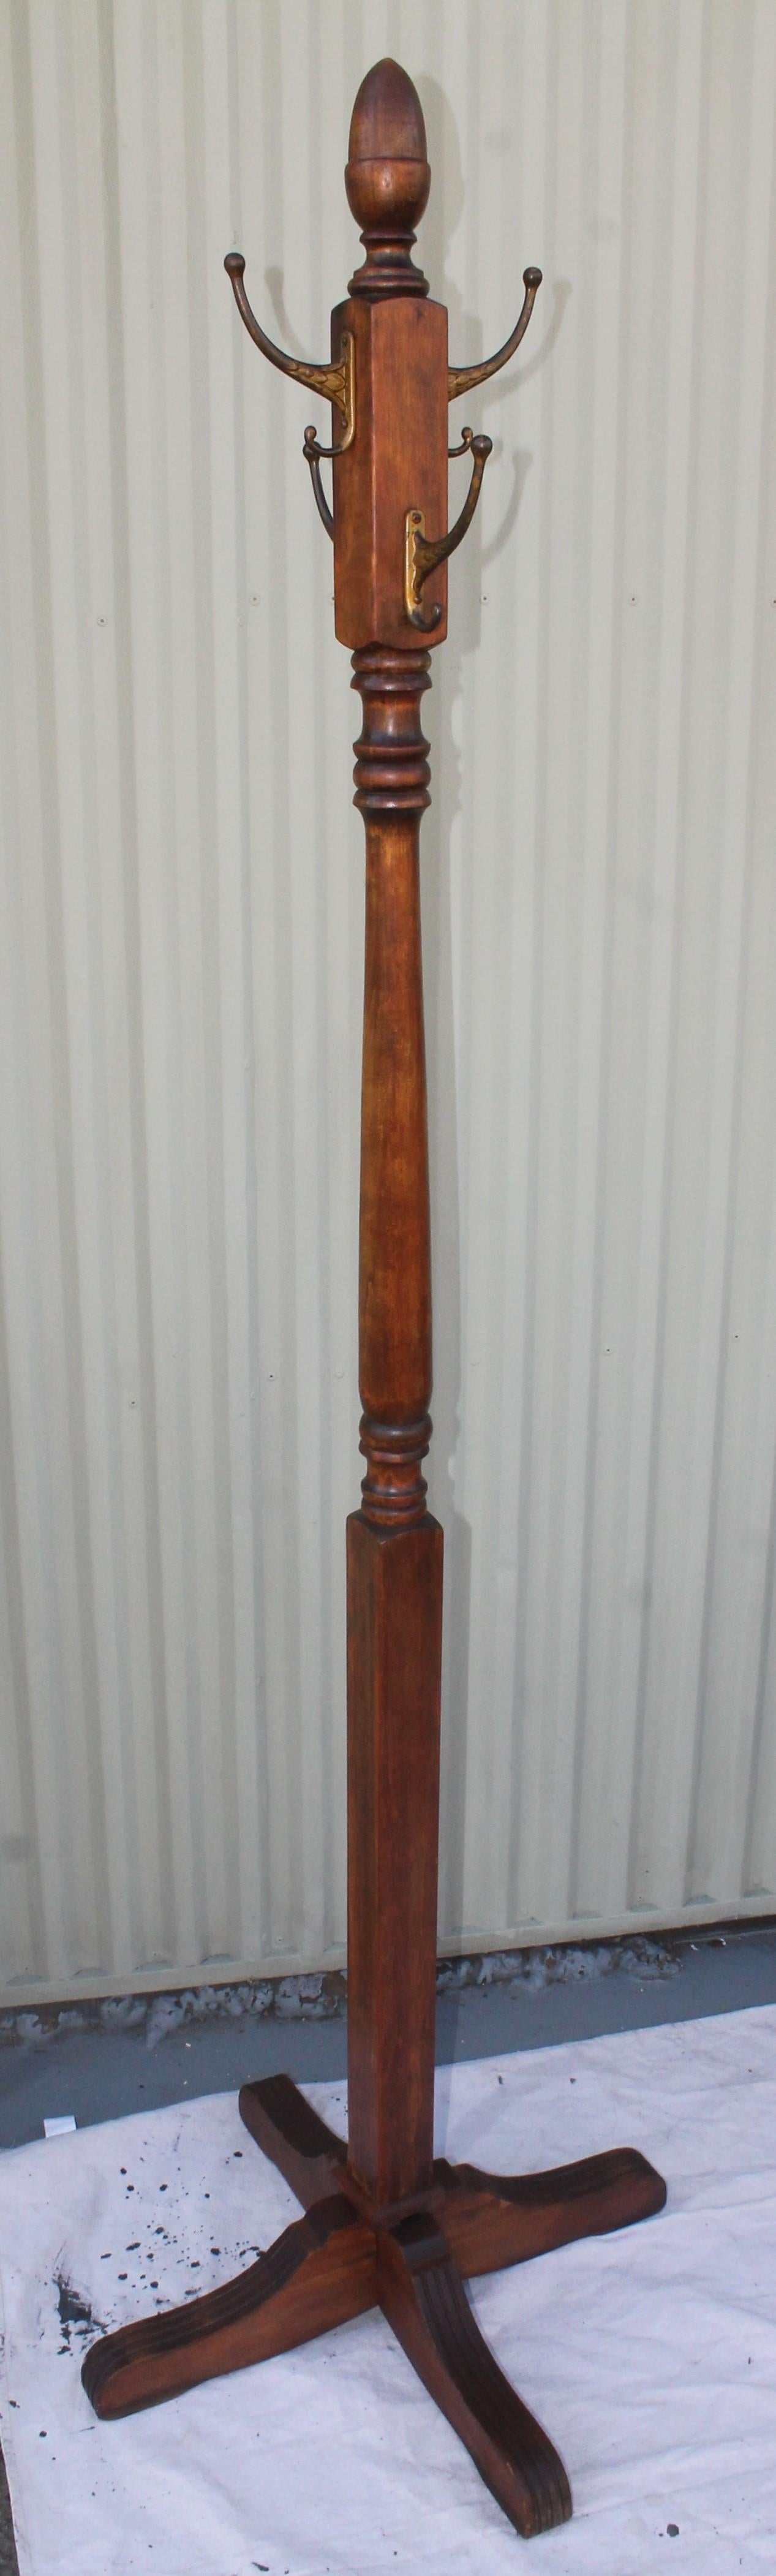 Great condition pine hall tree with original iron coat and hat rack iron hooks. Great old original surface.